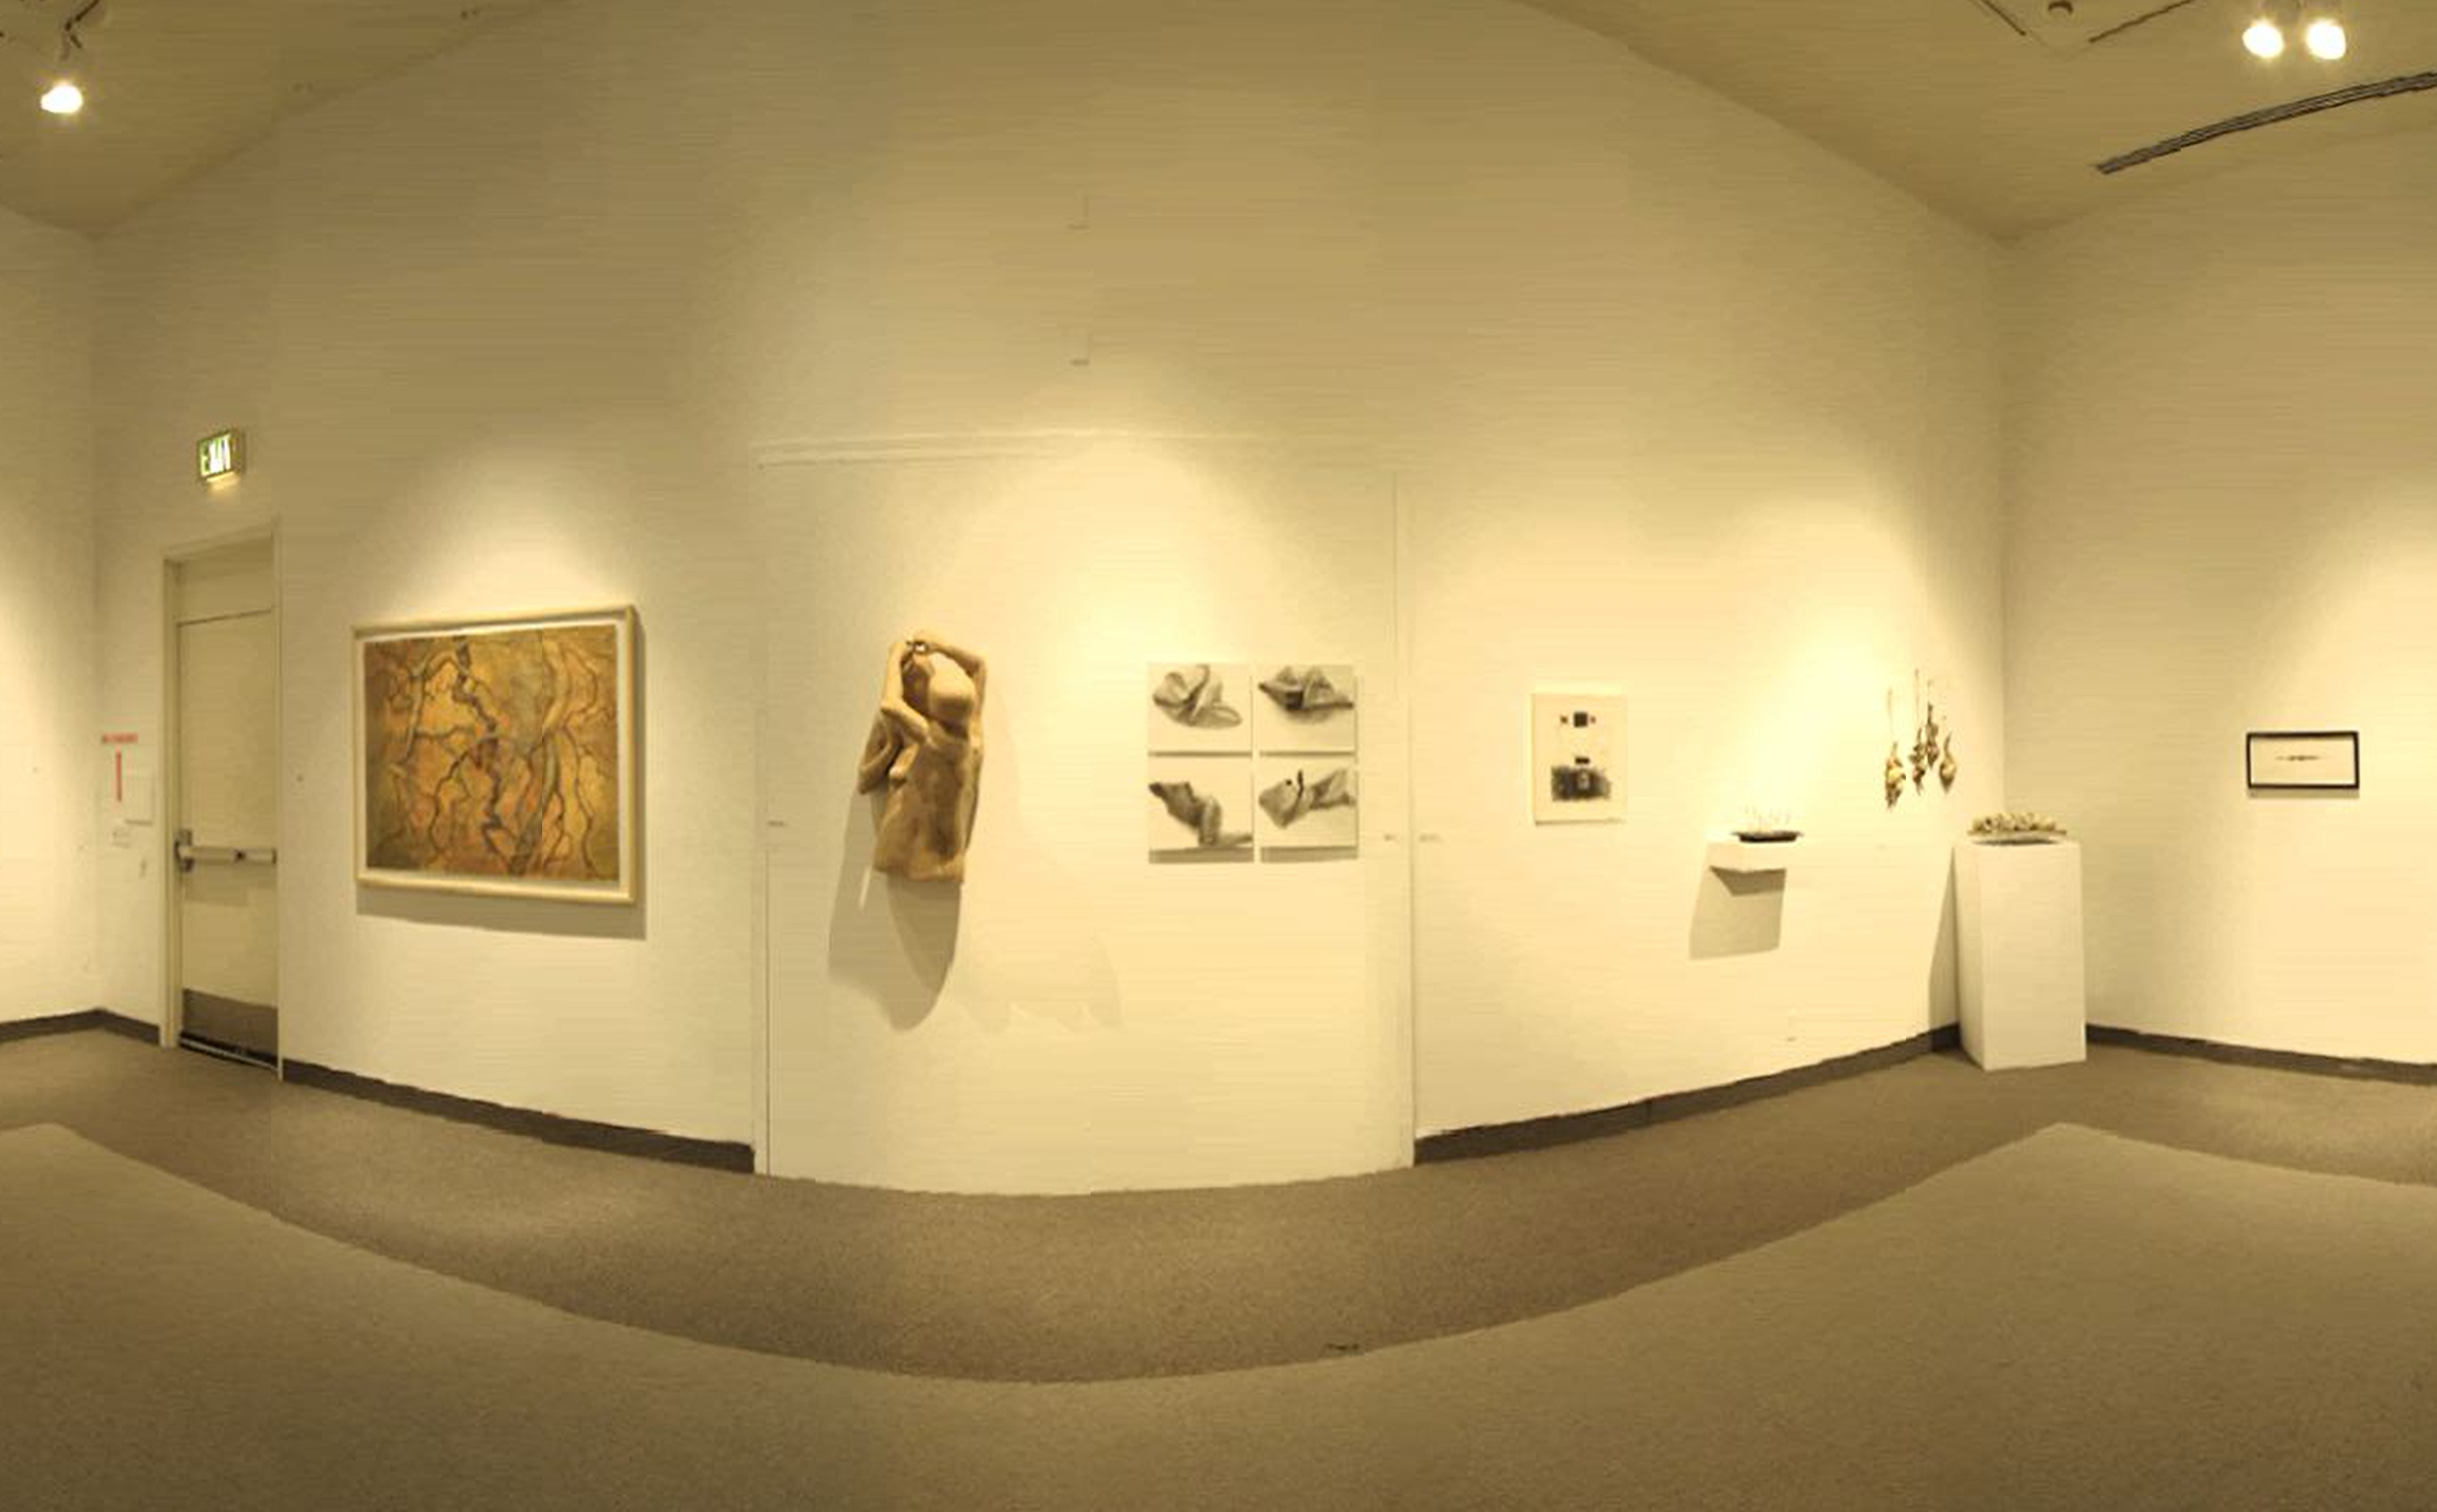 Installation View, Front West Gallery, Ink & Clay 31 Exhibition, January 07, 2005 to February 15, 2005